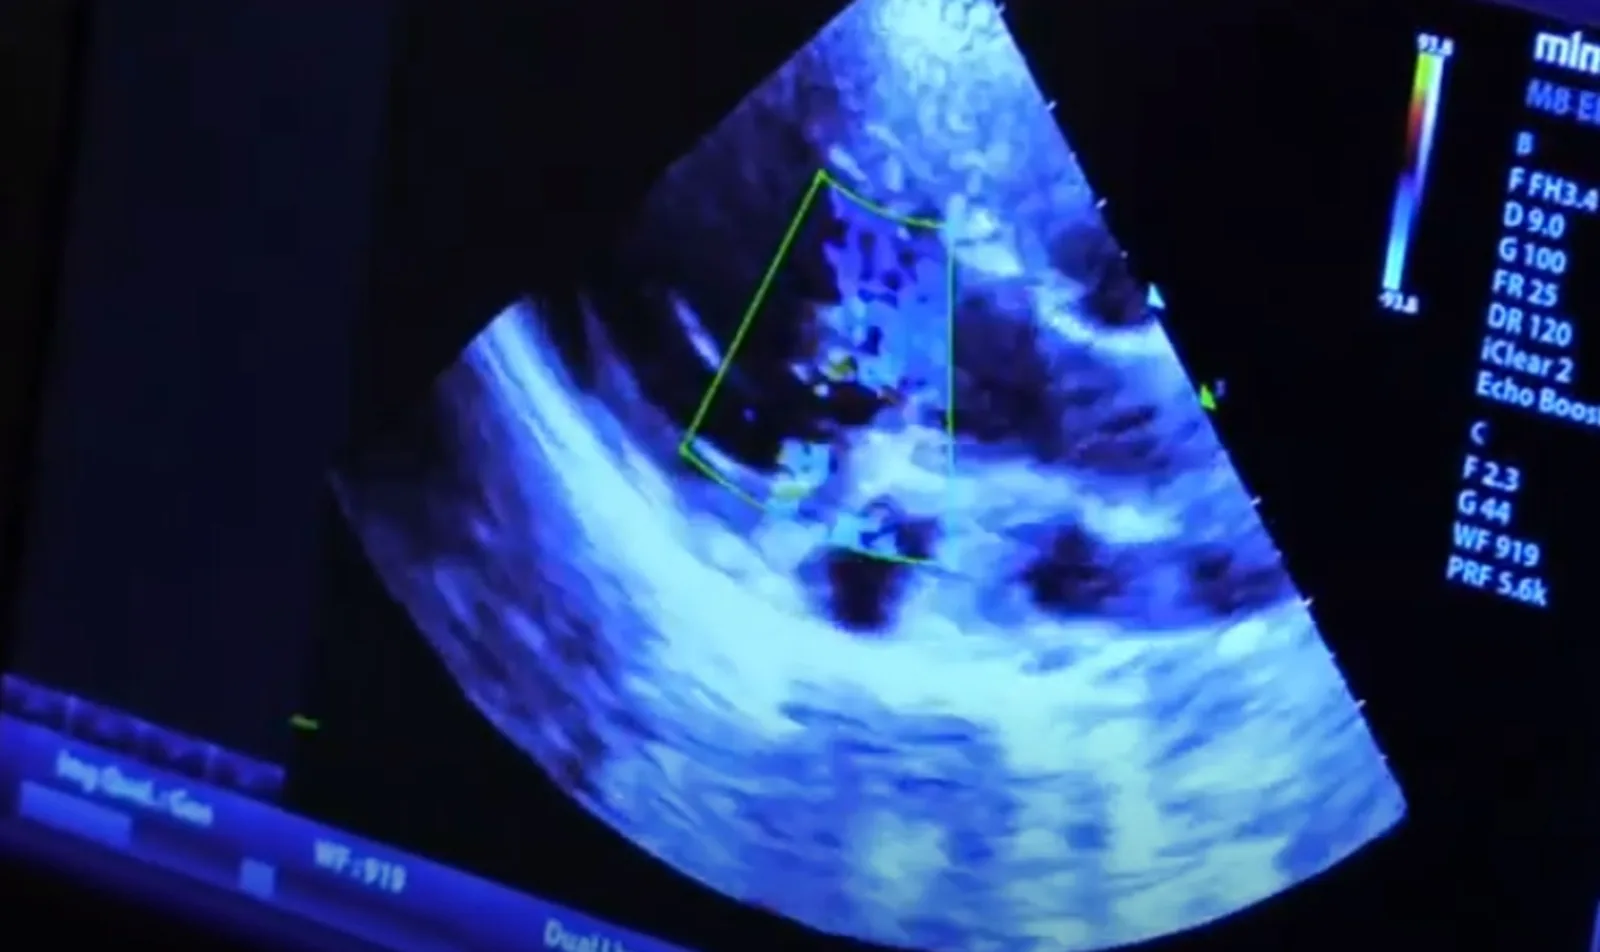 A view of an ultrasound screen at Brookswood Animal Clinic